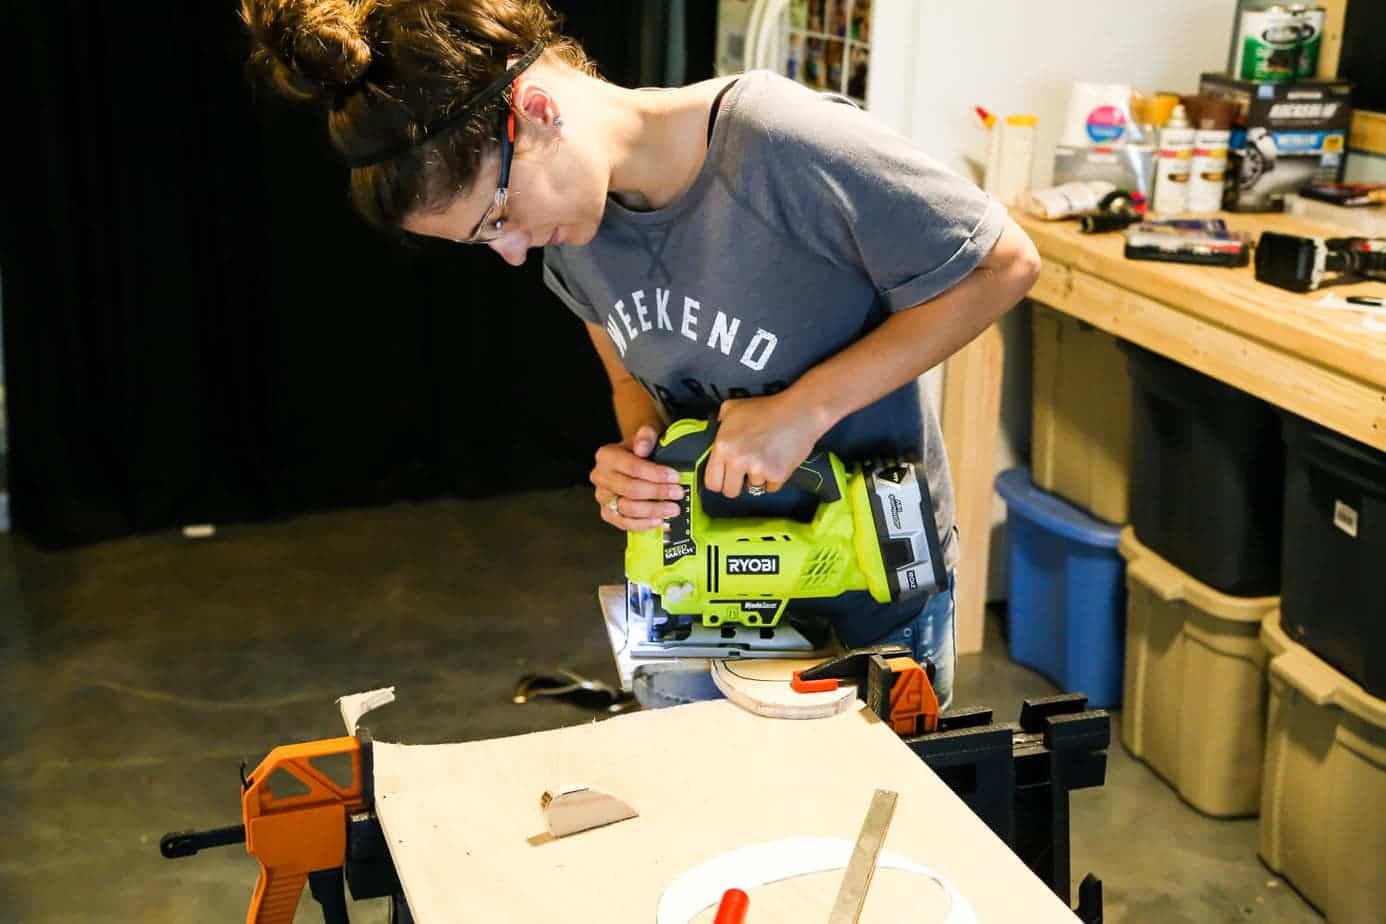 Power Tools for Beginners: How to Use a Jigsaw